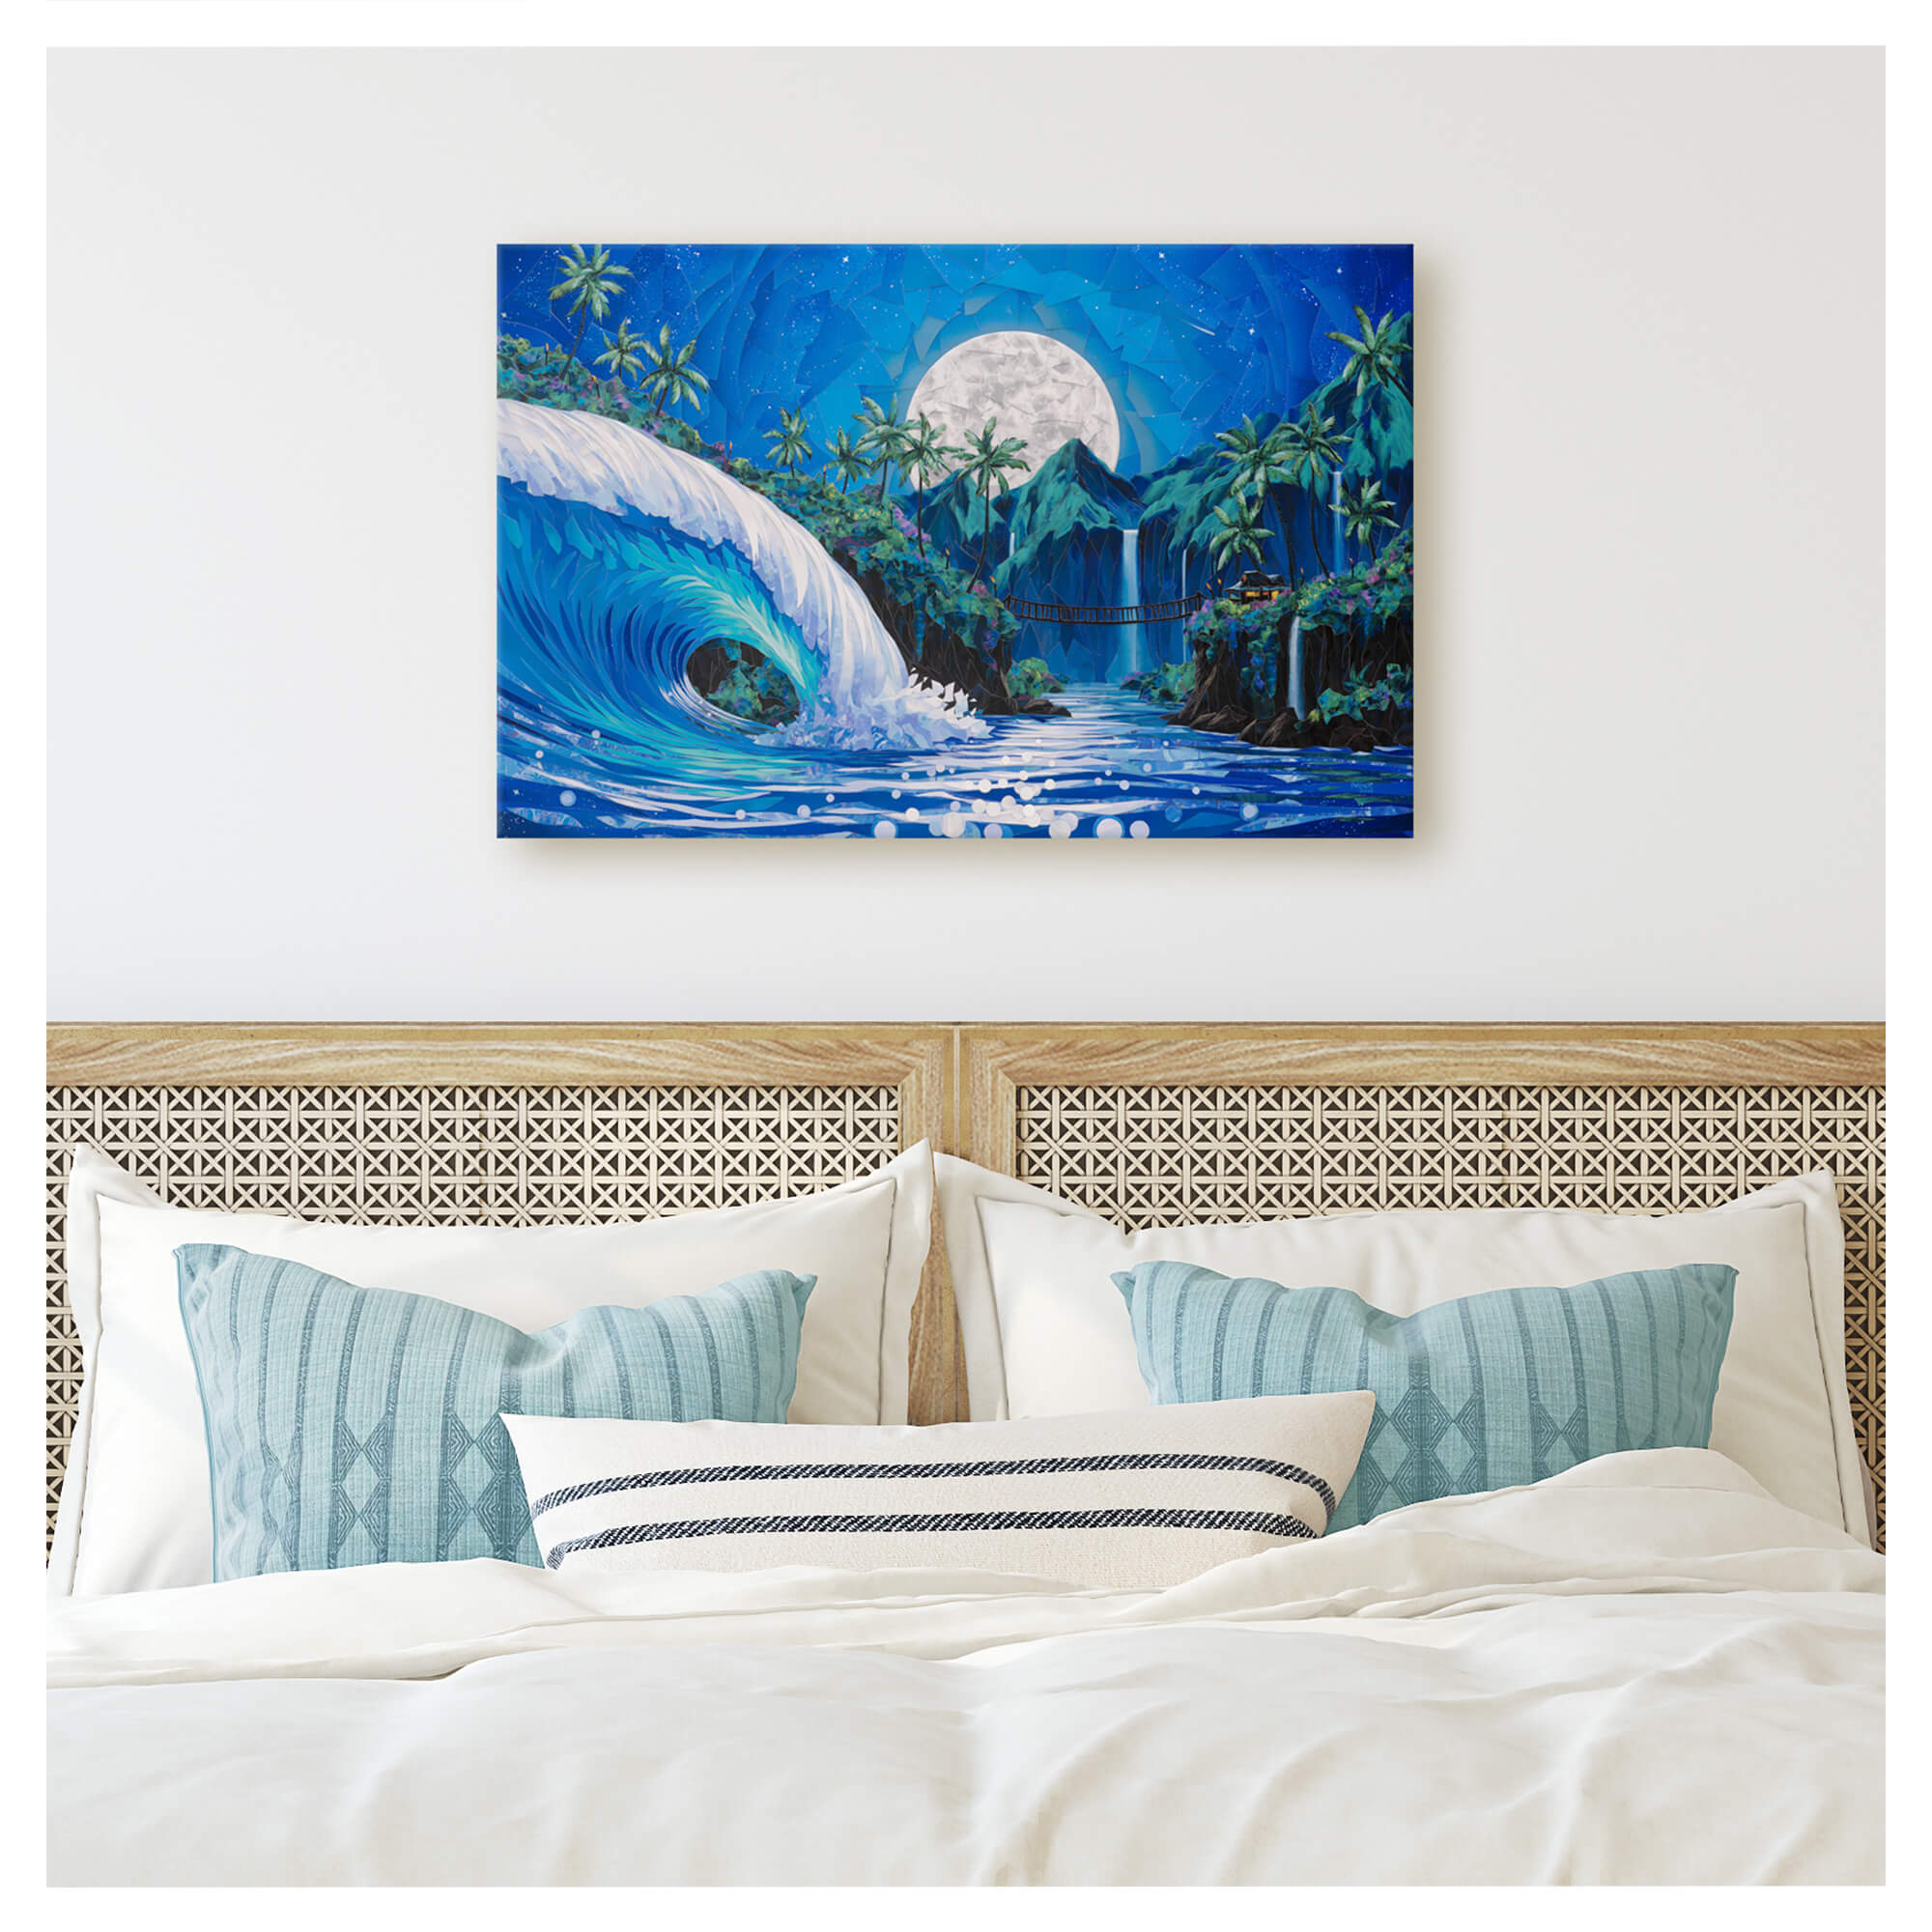 A canvas giclée art print featuring a collage of an evening view of a tropical landscape with a huge rolling wave, several waterfalls, and a full moon background by Hawaii artist Patrick Parker